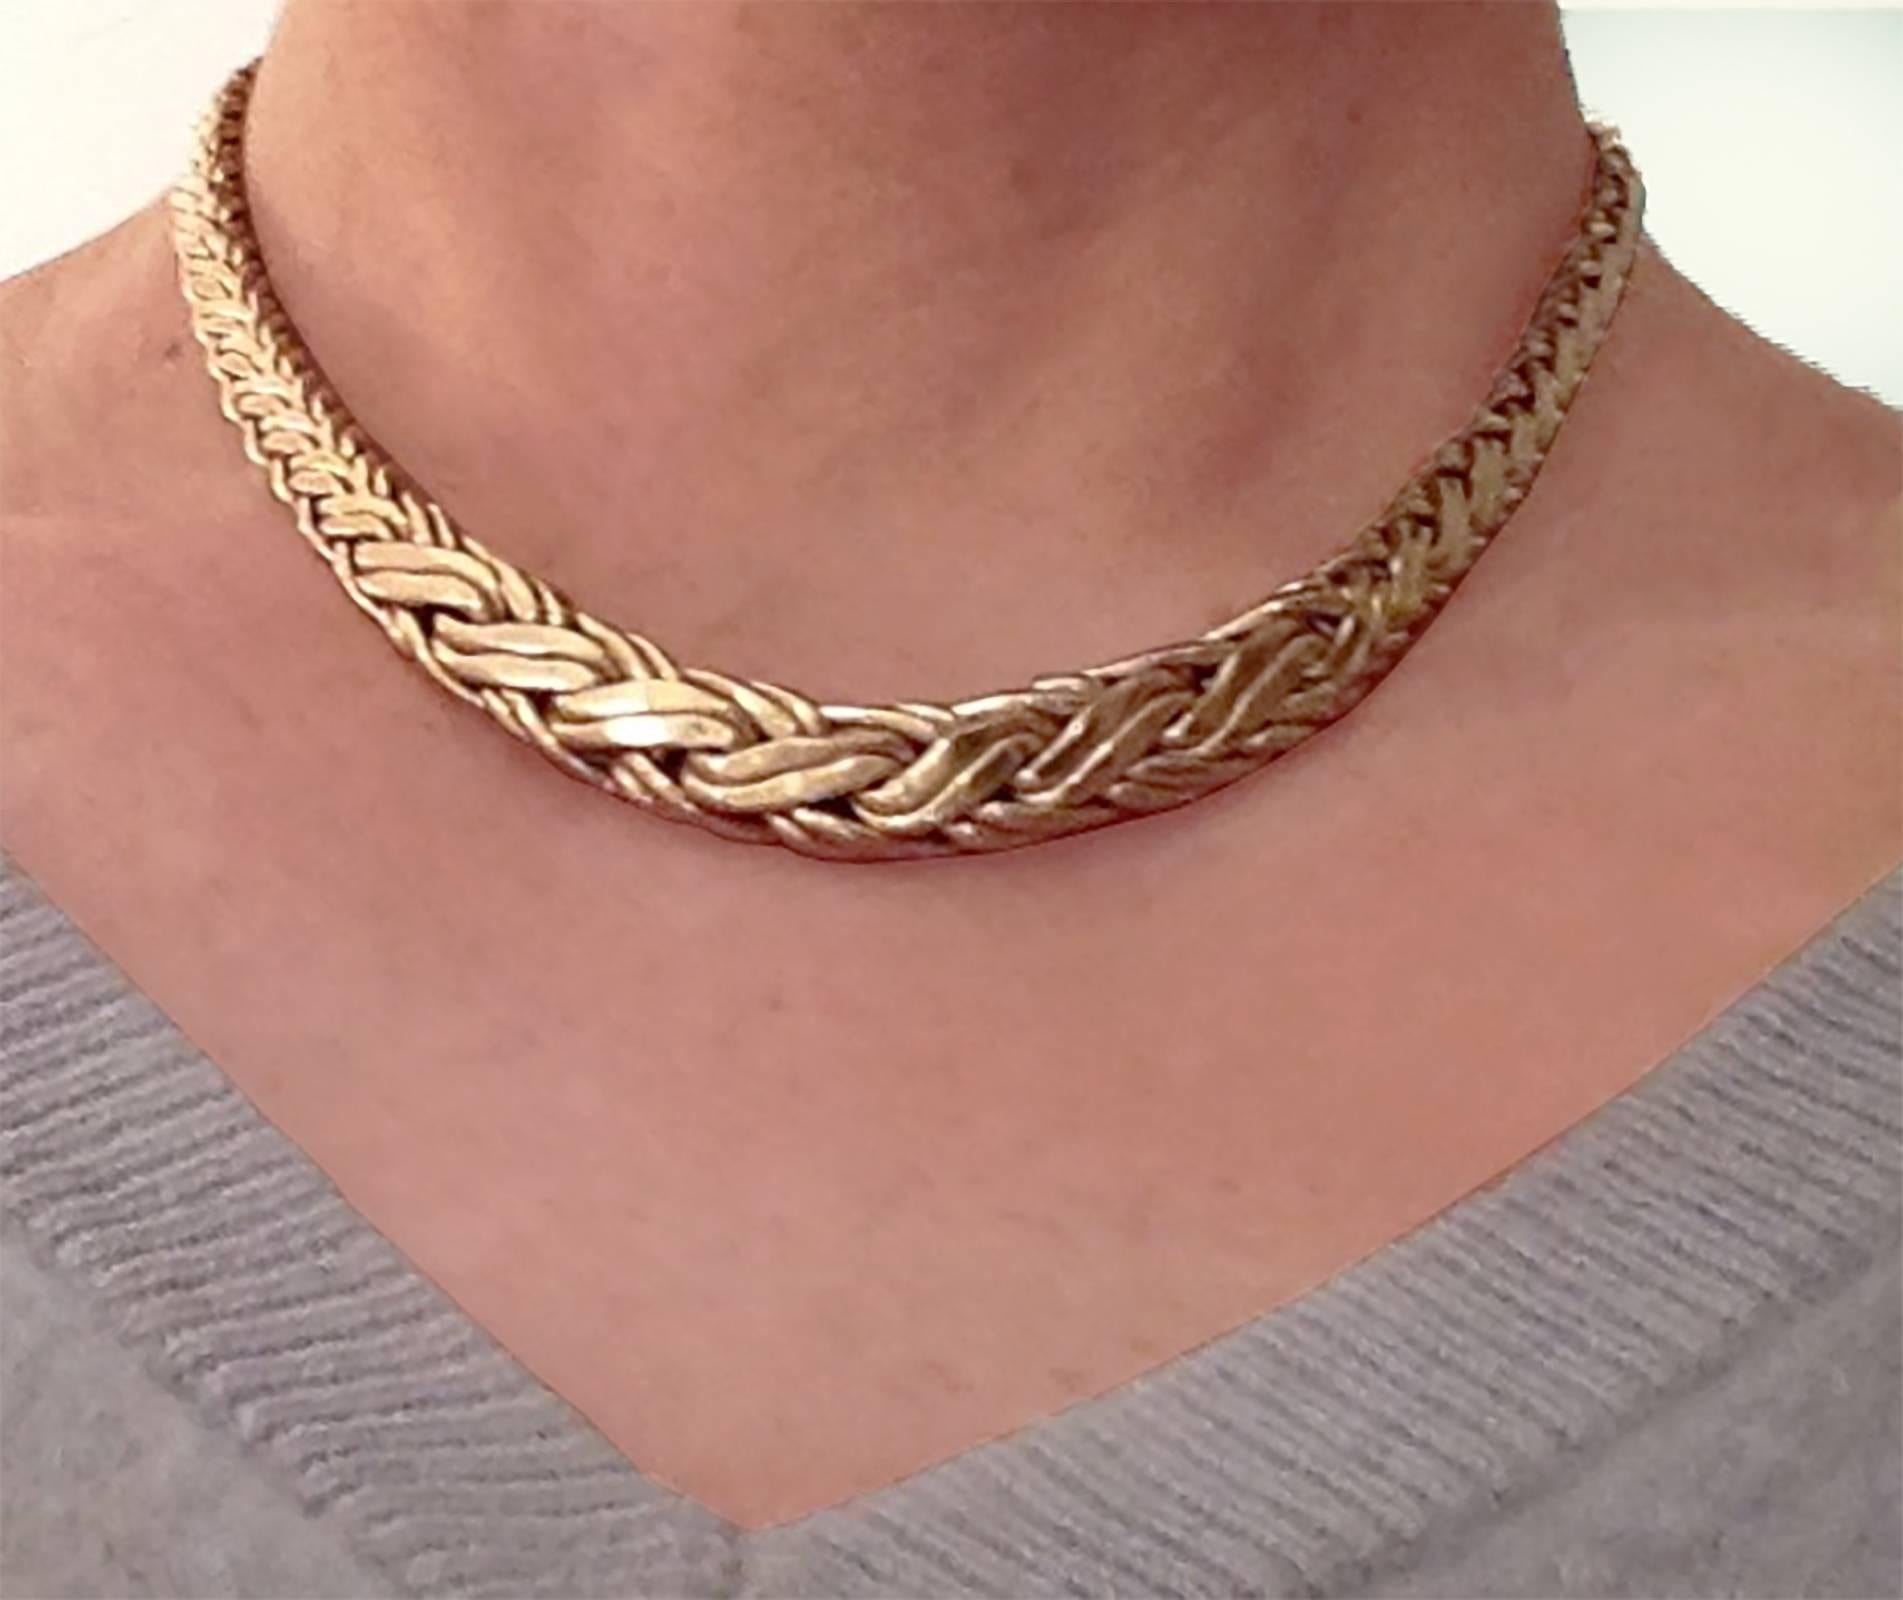 Beautiful Tiffany and Company, 14 karat yellow gold Russian weave necklace.
 16.25 inches long.  Graduates from 9mm to 4mm.  With safety latch.  34.2g.
Stamped Hallmarks  Tiffany & Co. 585